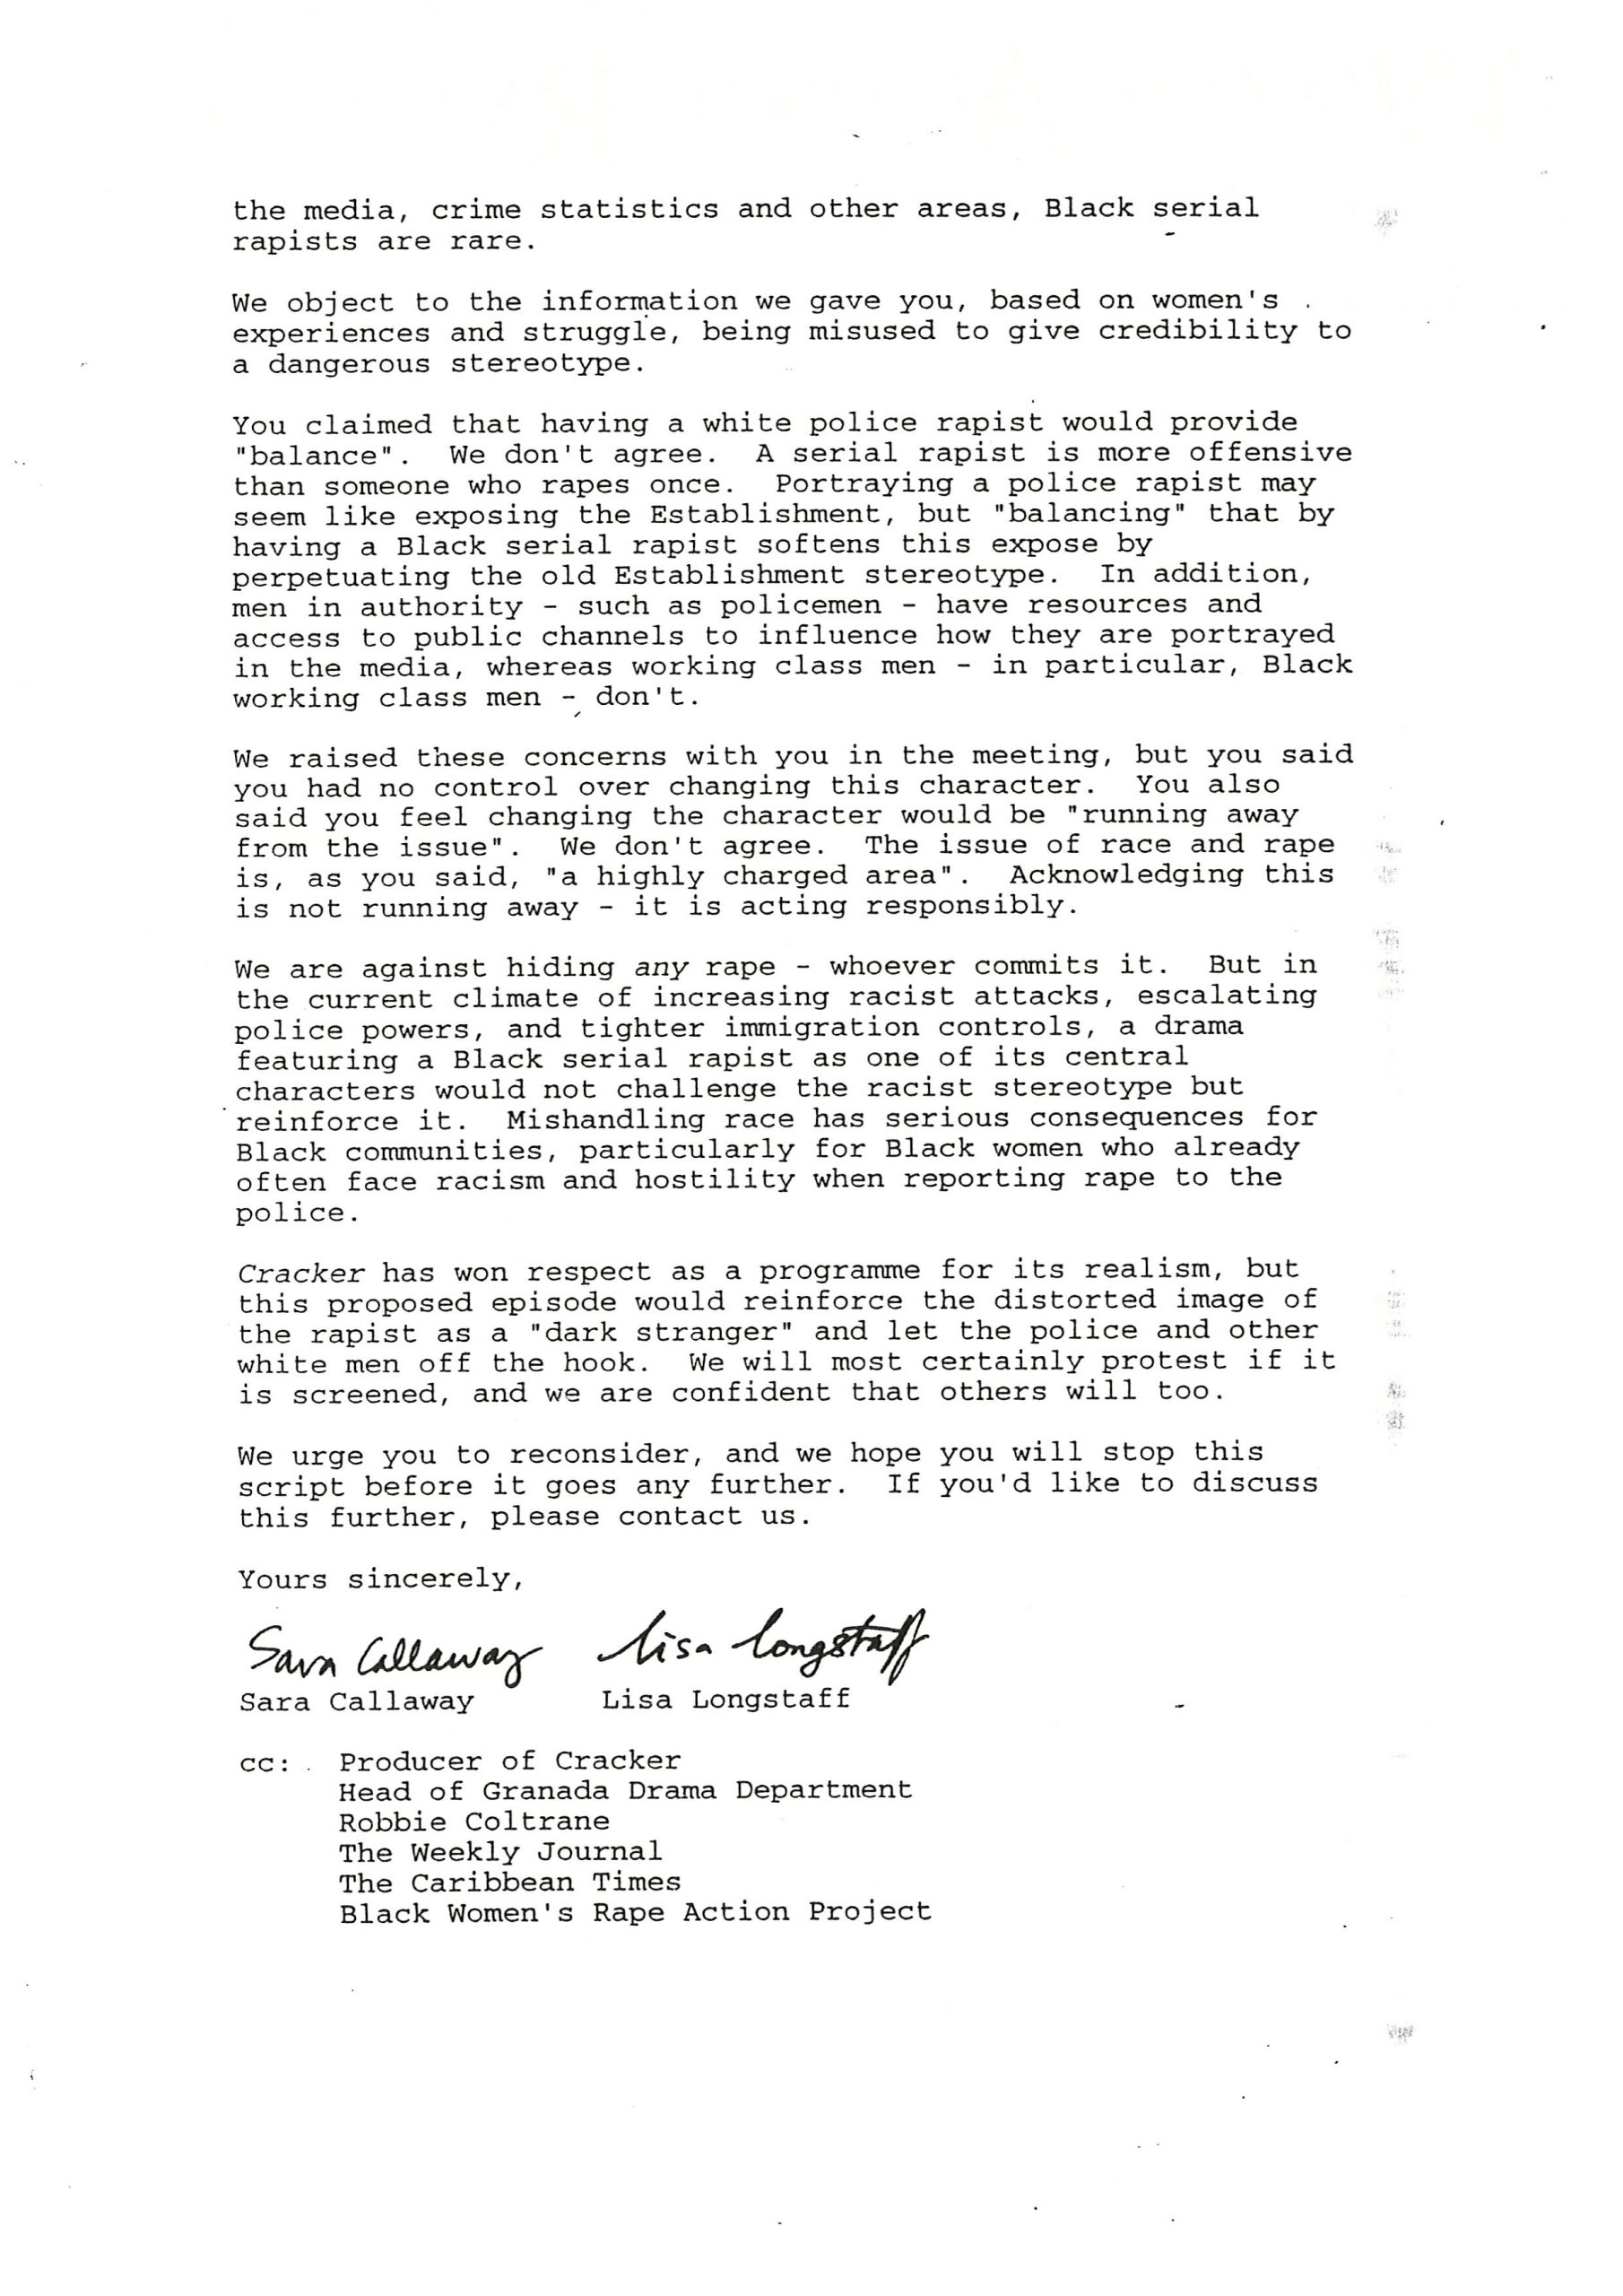 1994_Letter to Debbie Shewell 2